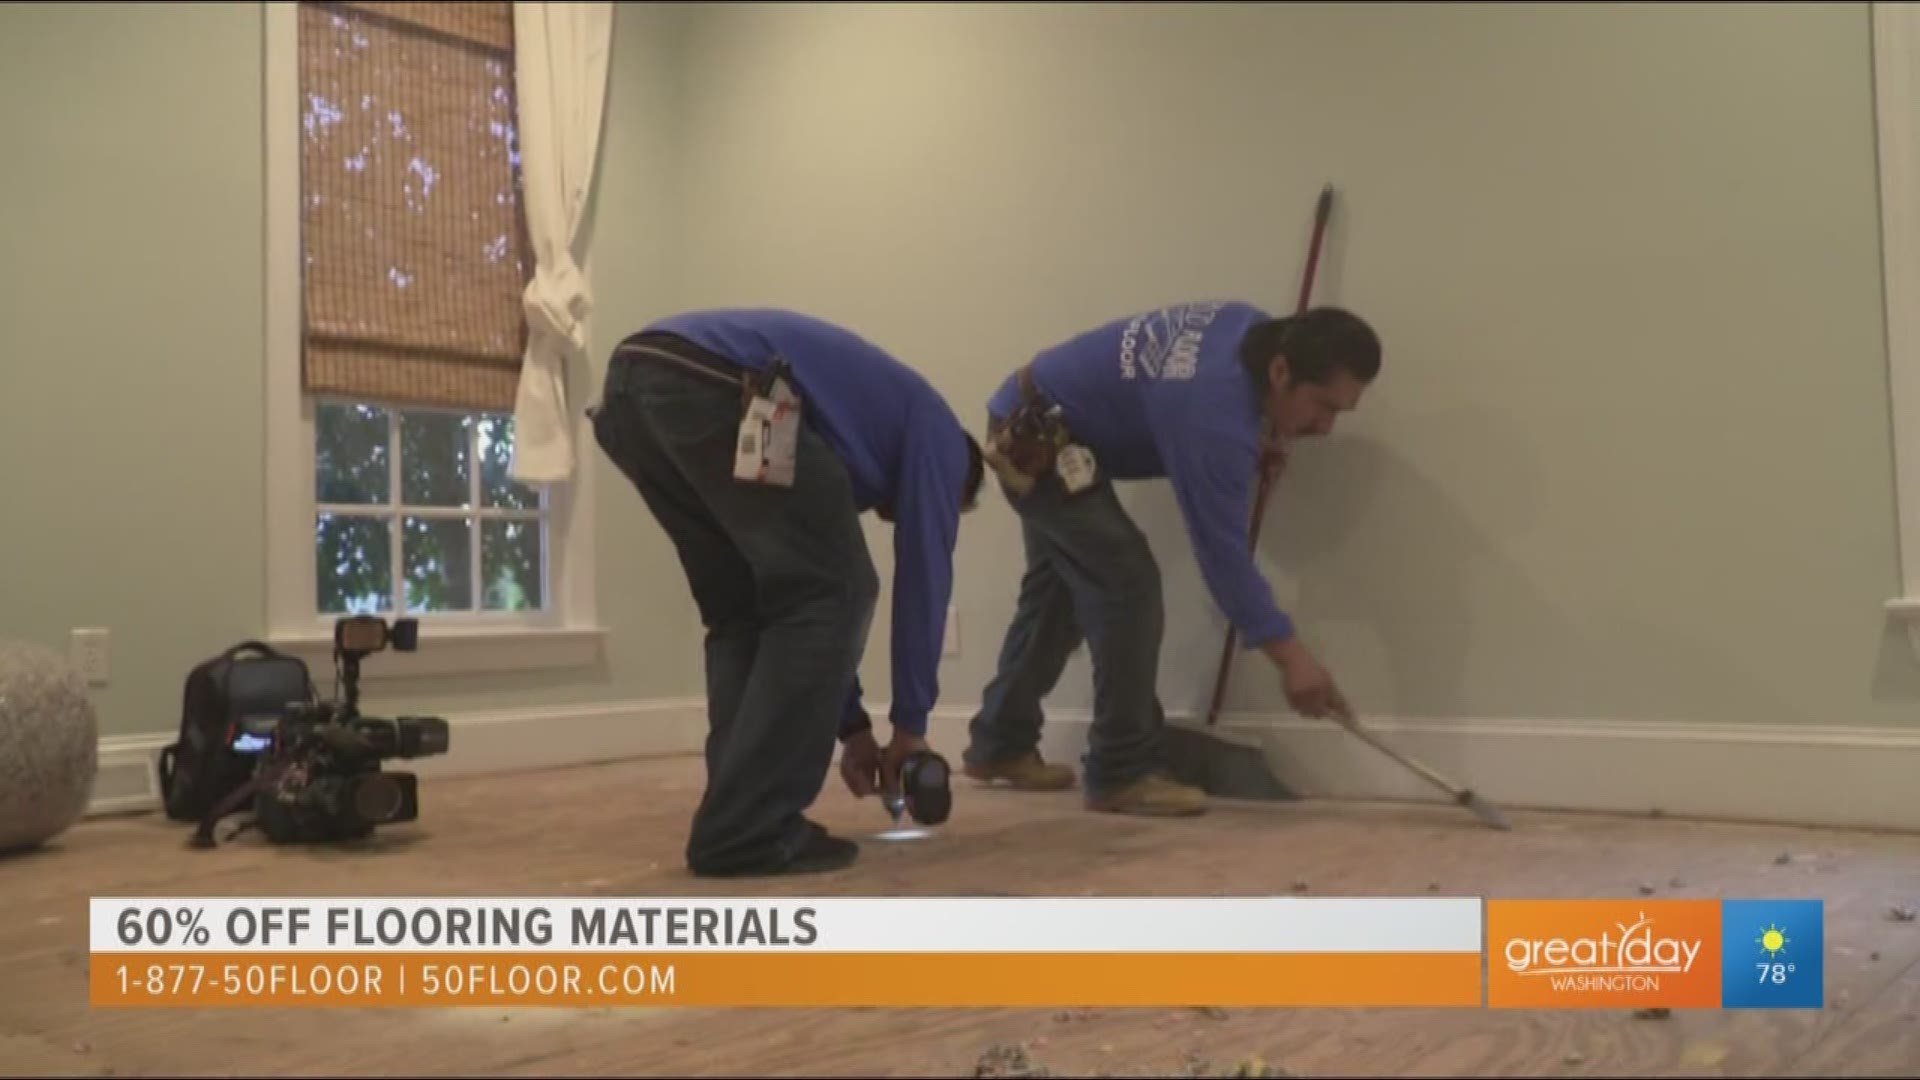 The floorings of your home say a lot more than you may think. That is why Laura Harders of 50 Floor stopped by with a deal to help you get new floors for your home. To schedule a consultation, call 1-877-50FLOOR or visit 50Floor.com. This segment was sponsored by 50 Floor.